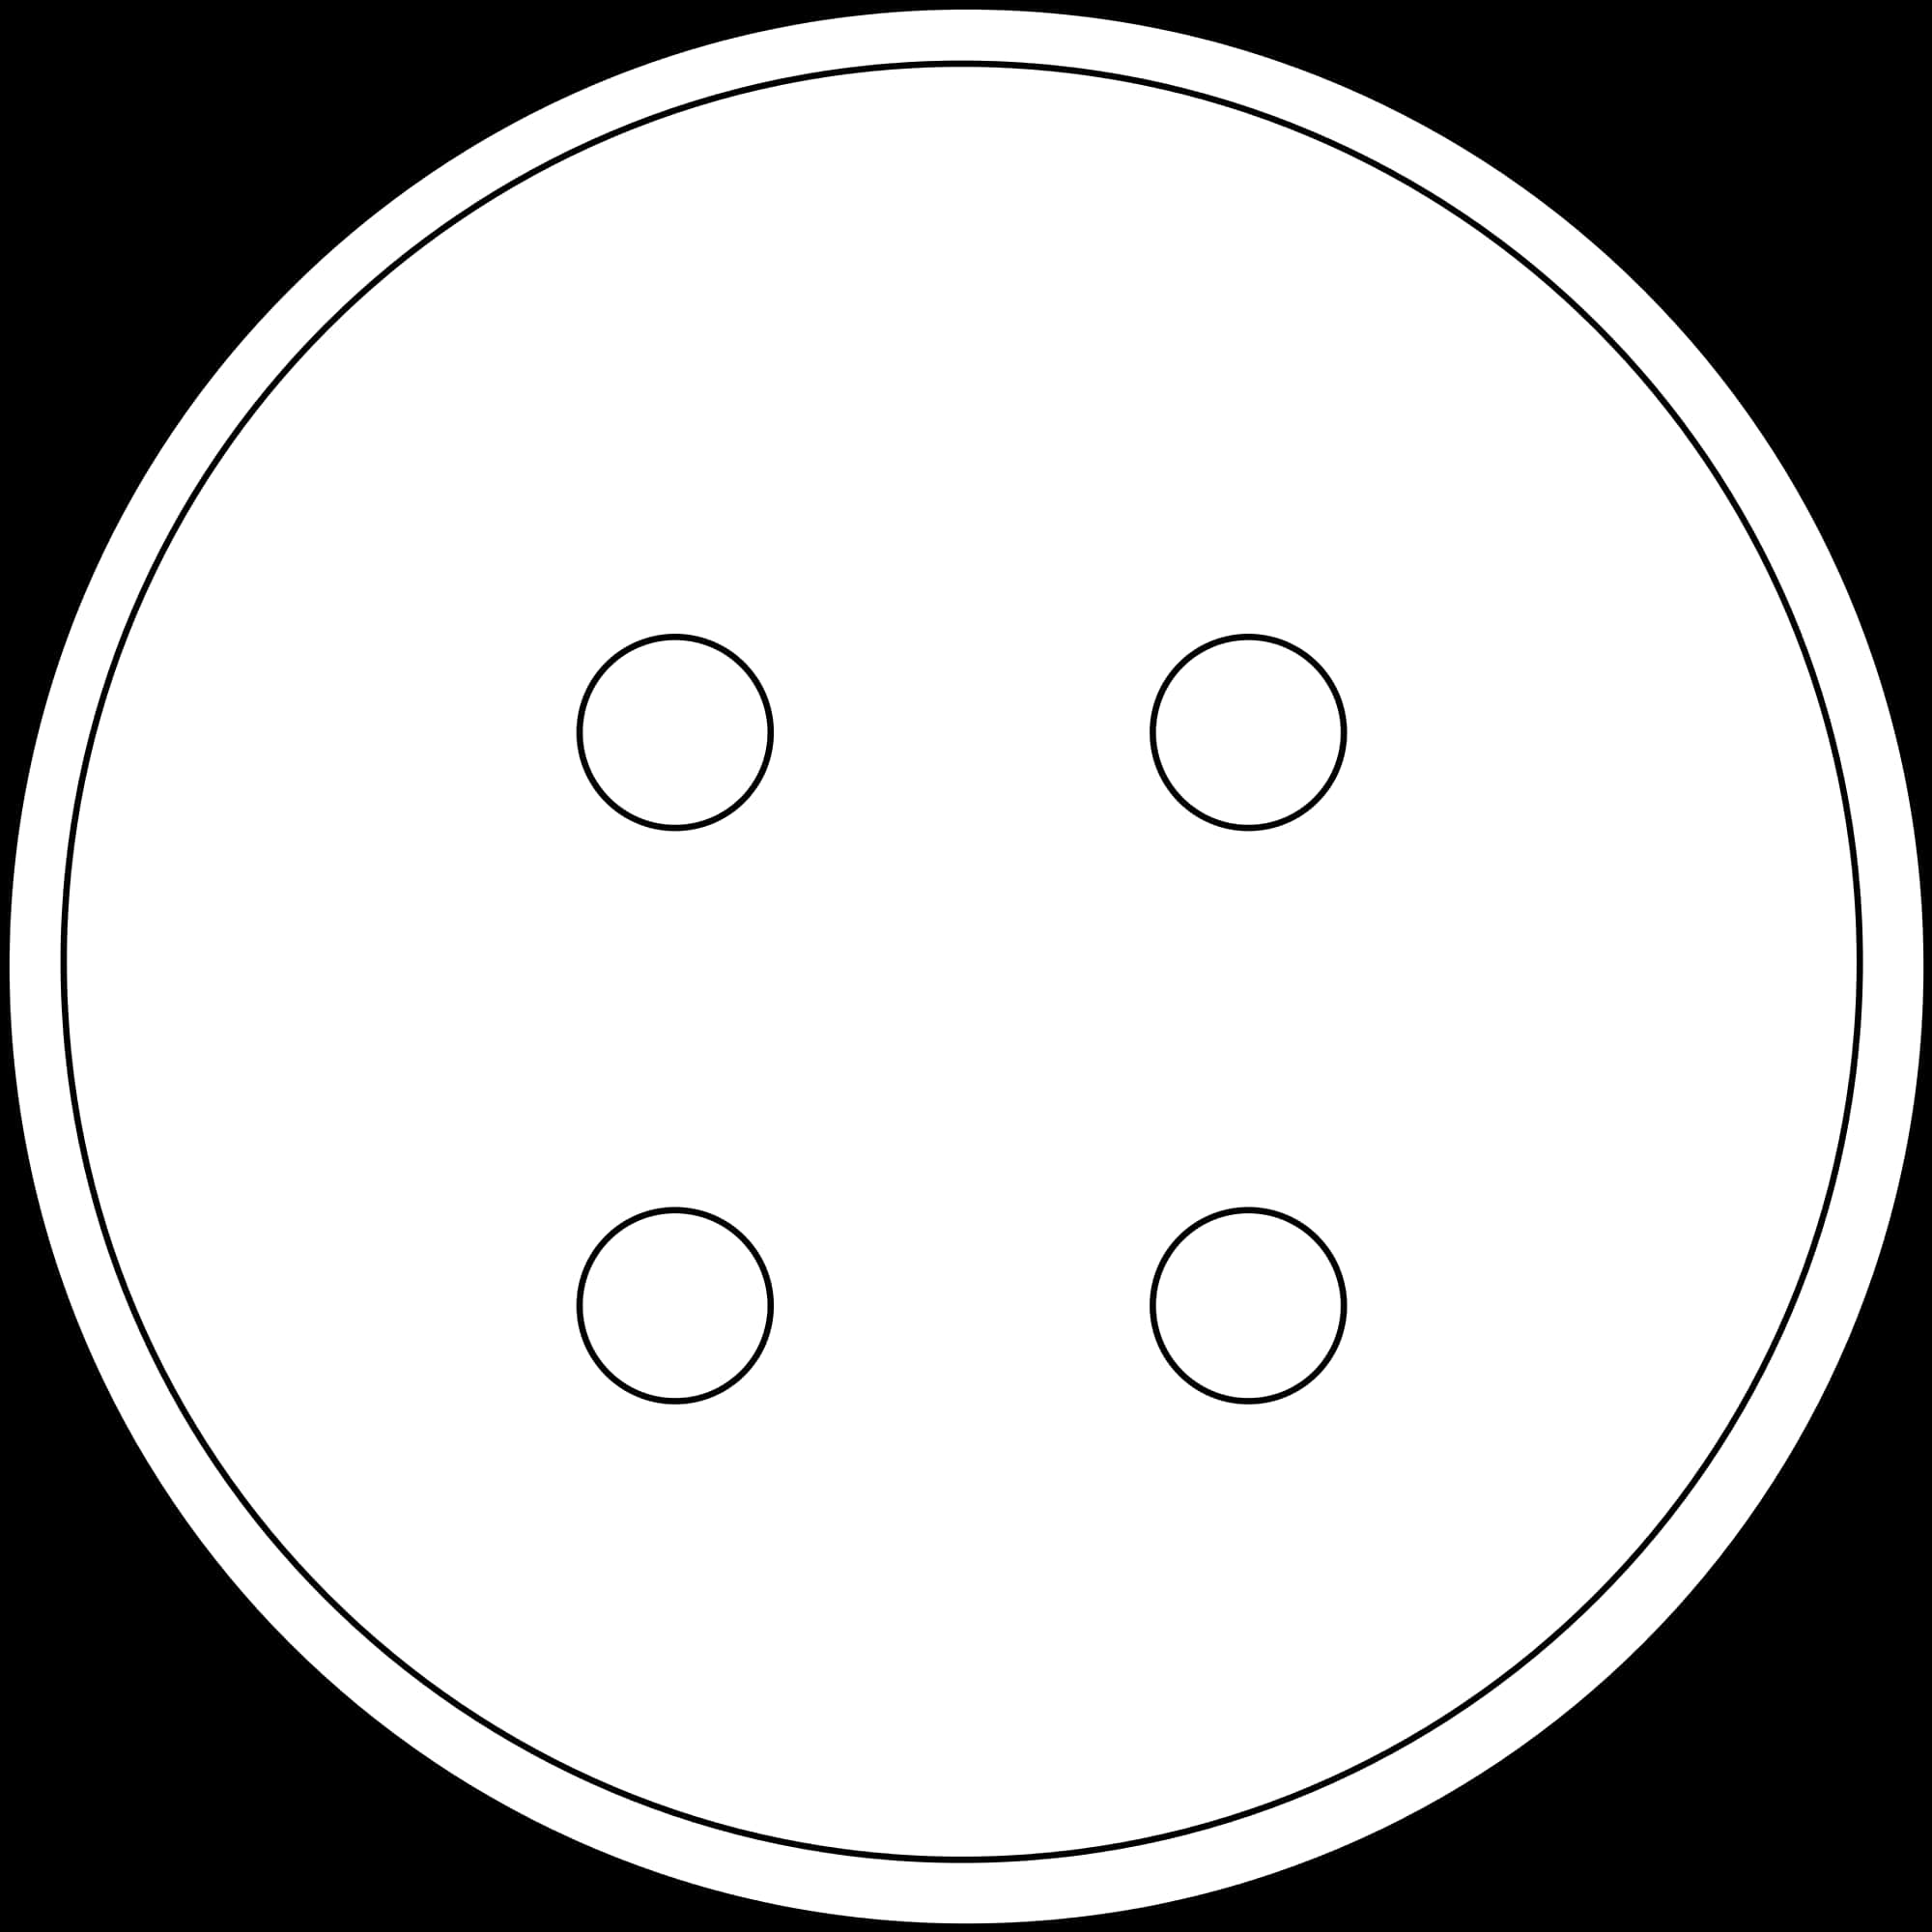 White Circle Black Outline Four Dots PNG image